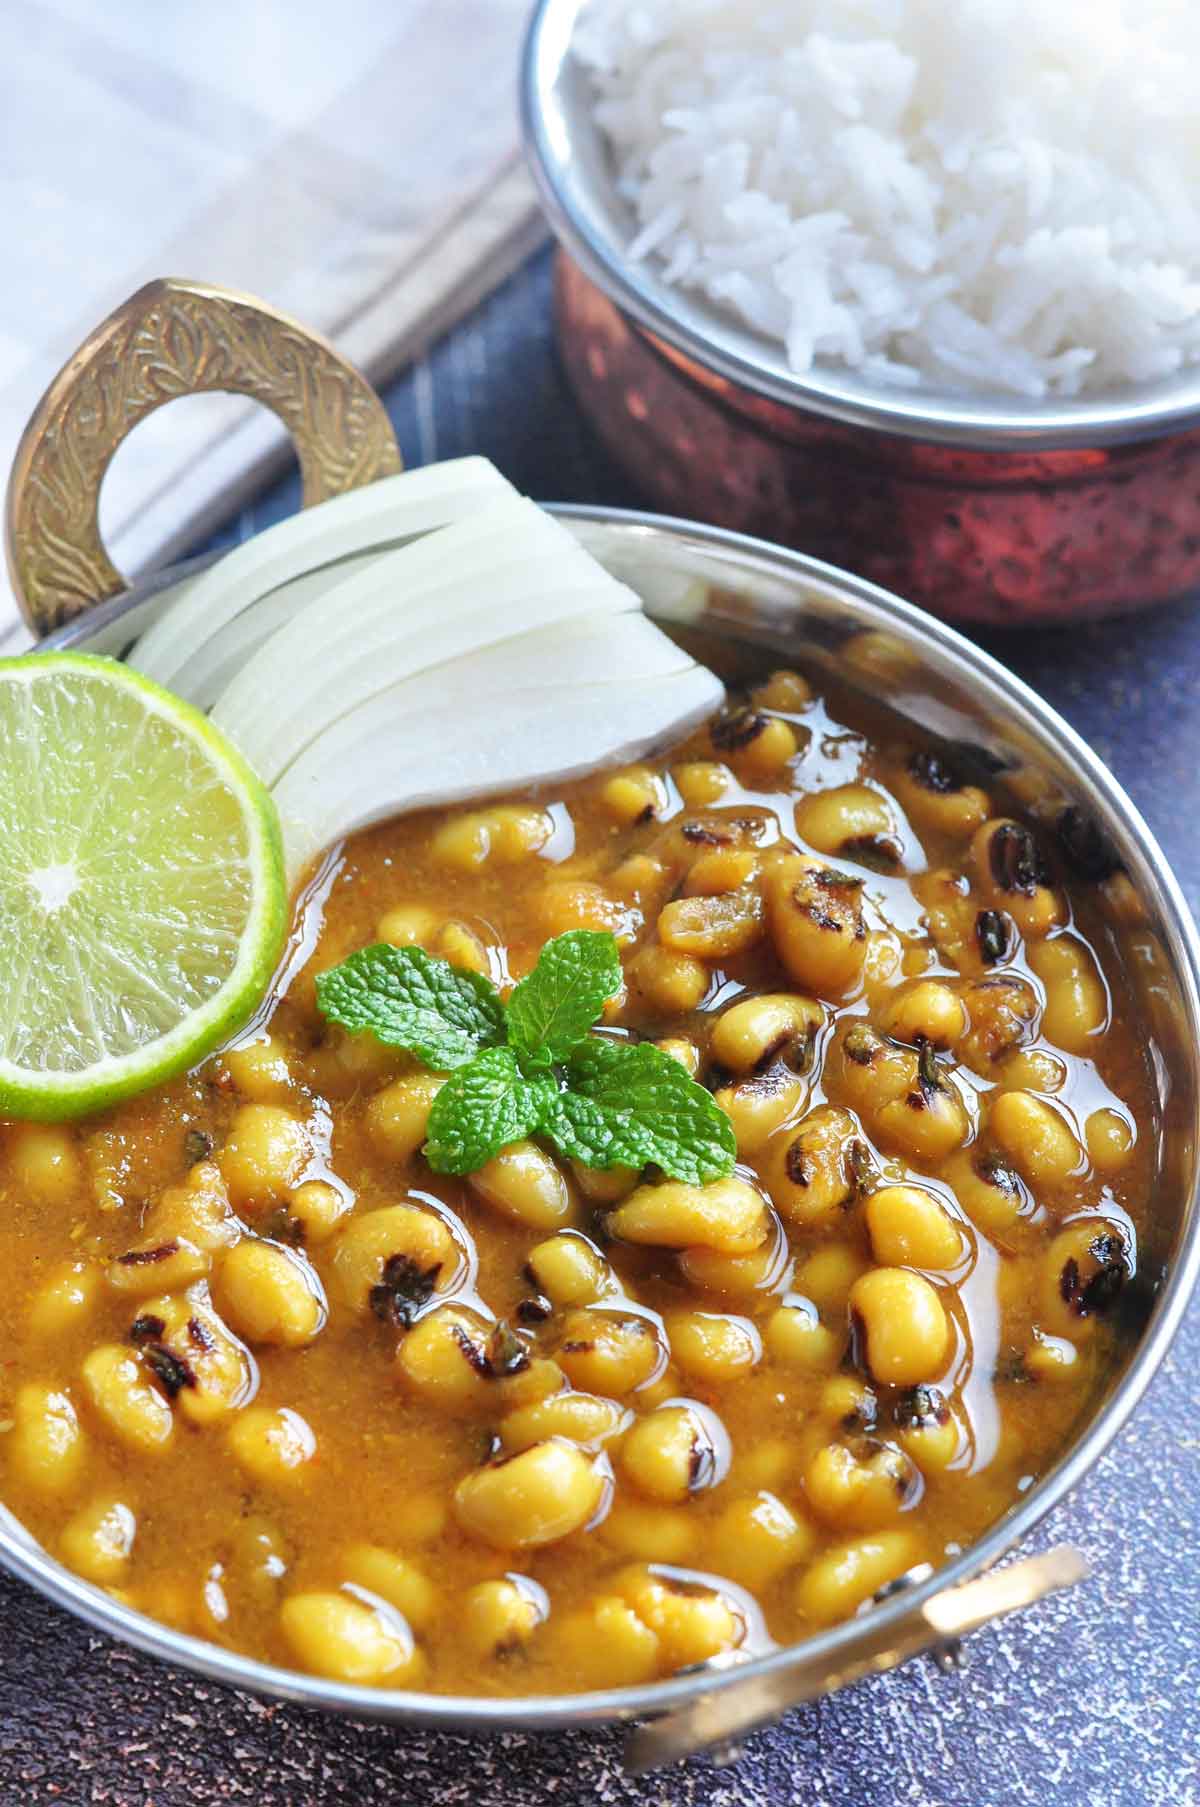 Black eyed pea curry served in a metallic bowl and garnished with sliced lime and onion.